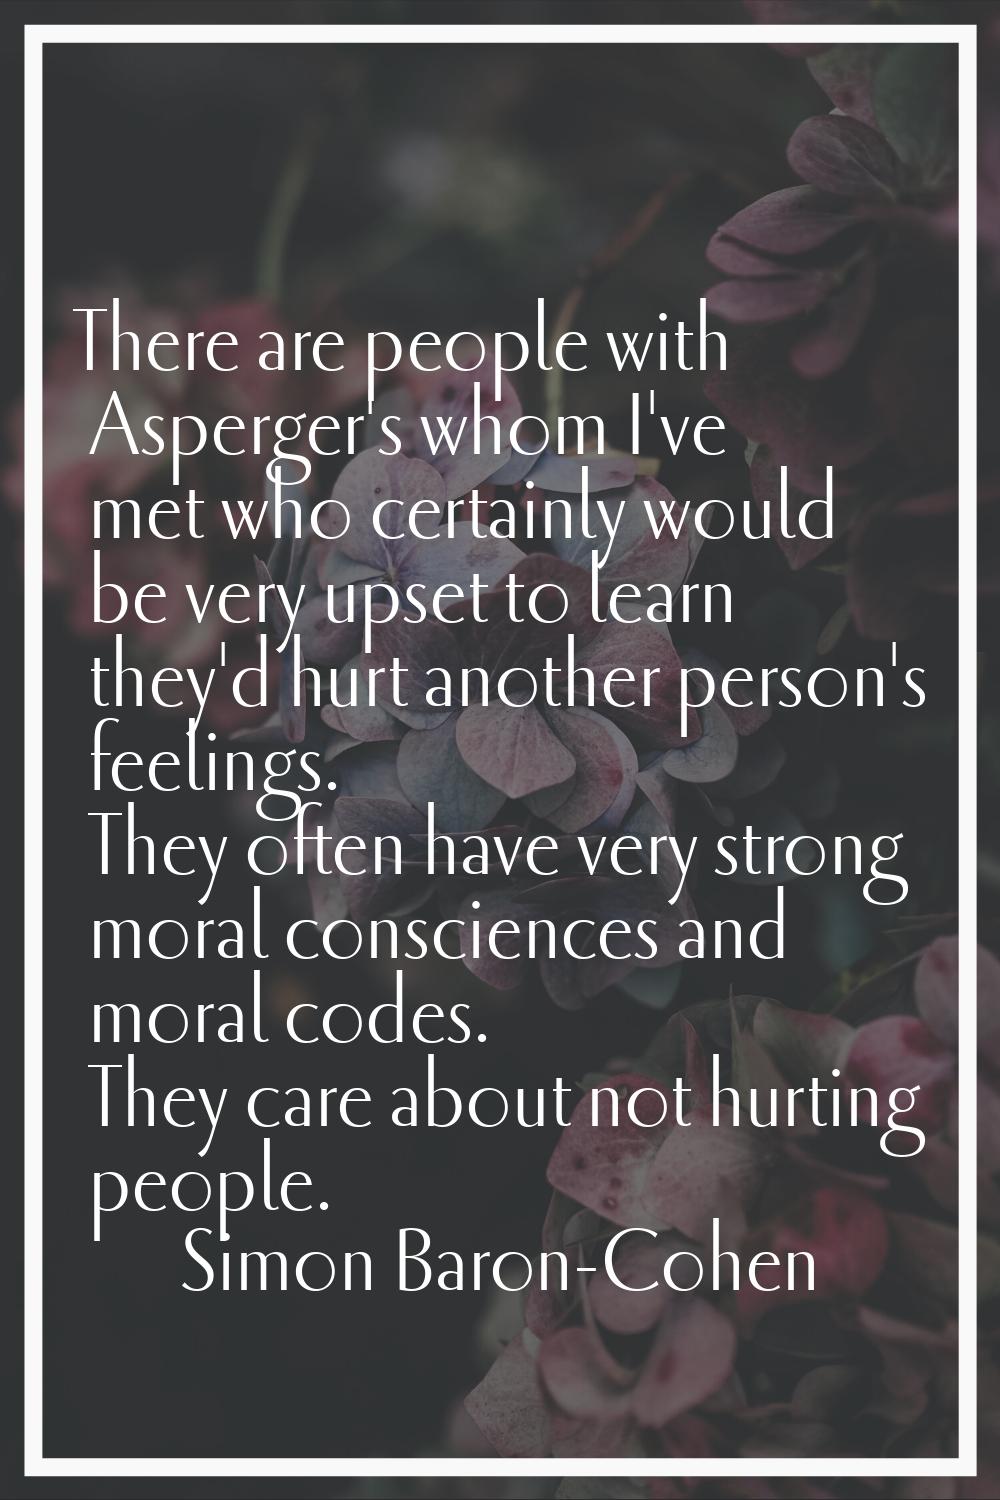 There are people with Asperger's whom I've met who certainly would be very upset to learn they'd hu